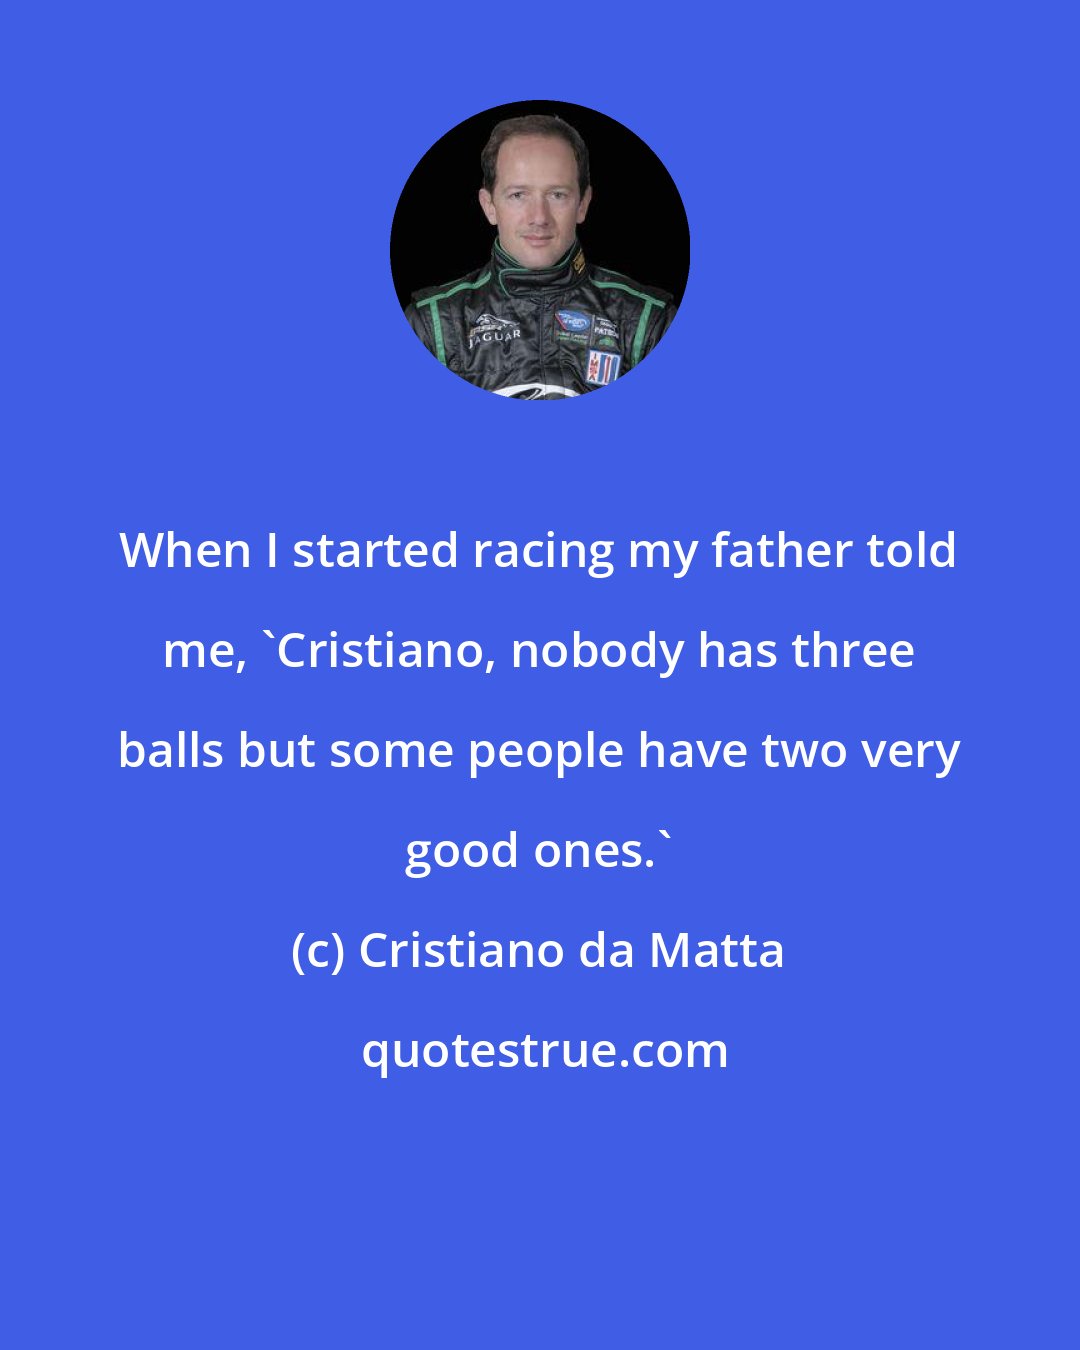 Cristiano da Matta: When I started racing my father told me, 'Cristiano, nobody has three balls but some people have two very good ones.'